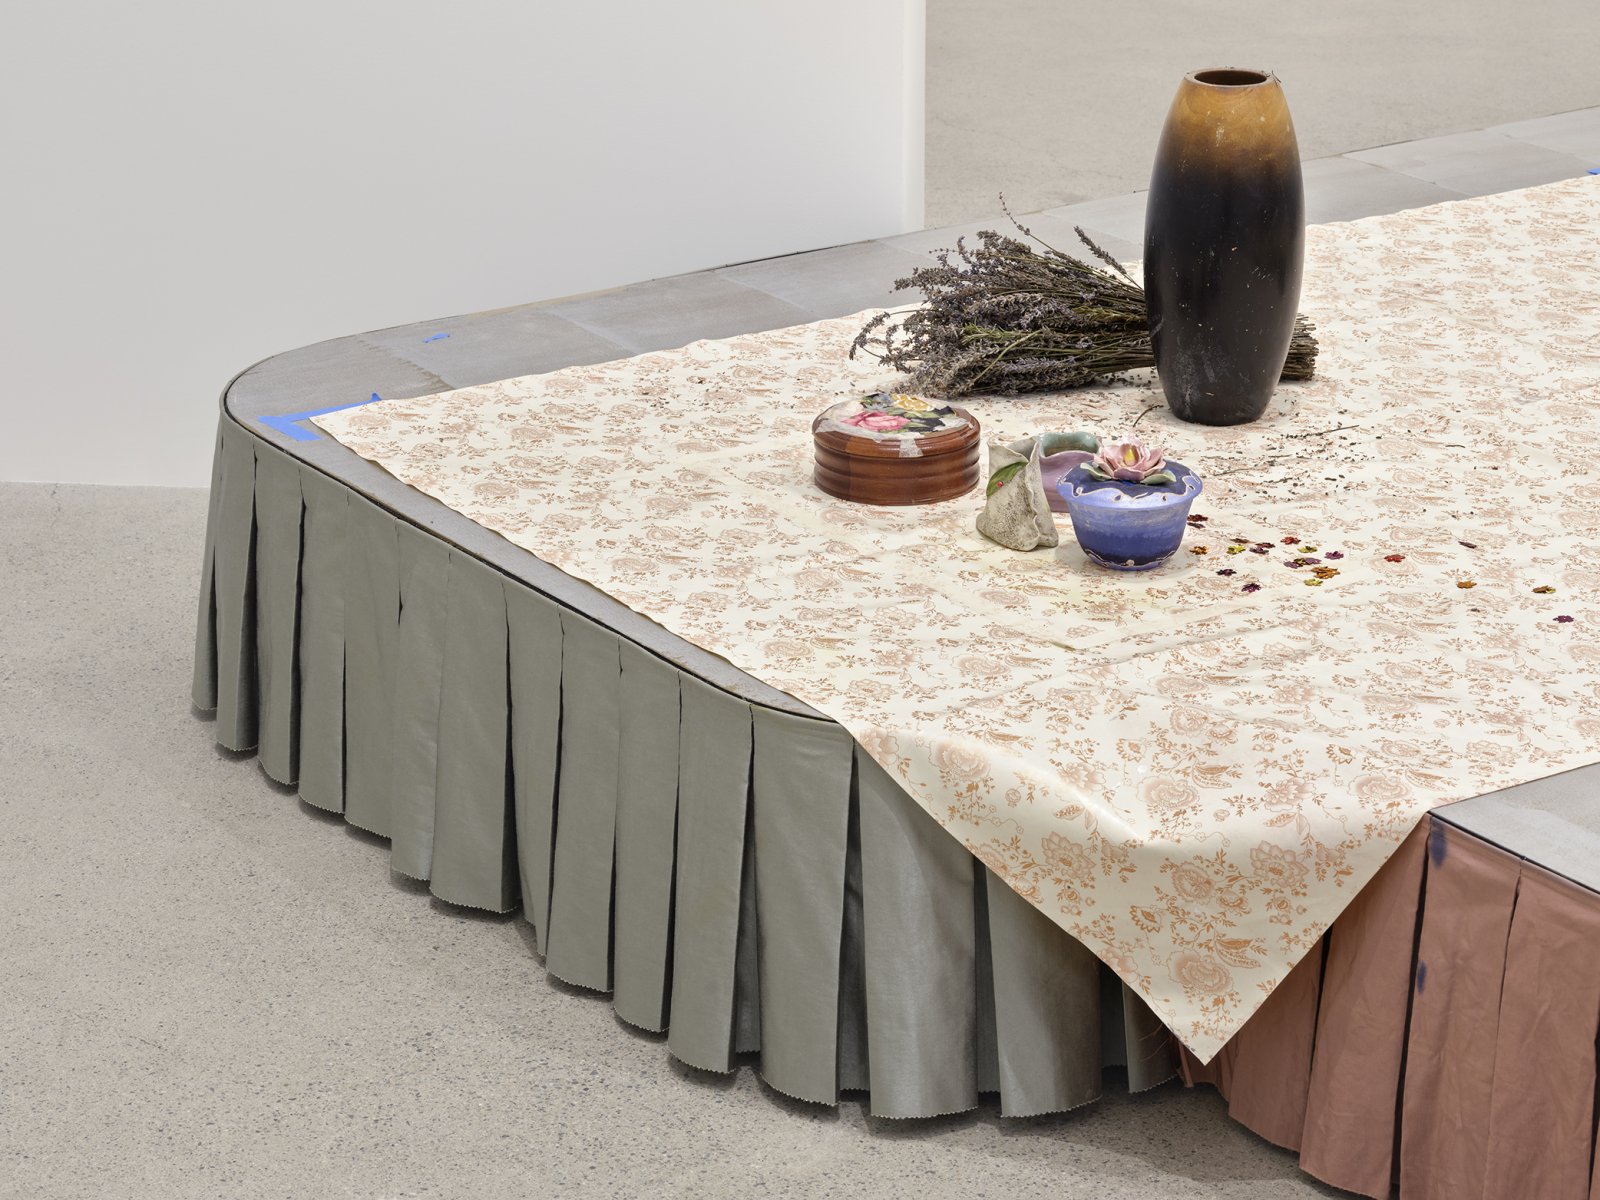 ​​Liz Magor, Dressed (detail), 2020, painted plywood, fabric skirting, silicone rubber, hosiery, sheepskin, vinyl tablecloth, wood and ceramic crafts, plastic cup, dried lavender, packaging materials, 28 x 120 x 108 in. (71 x 305 x 274 cm)​ by Liz Magor